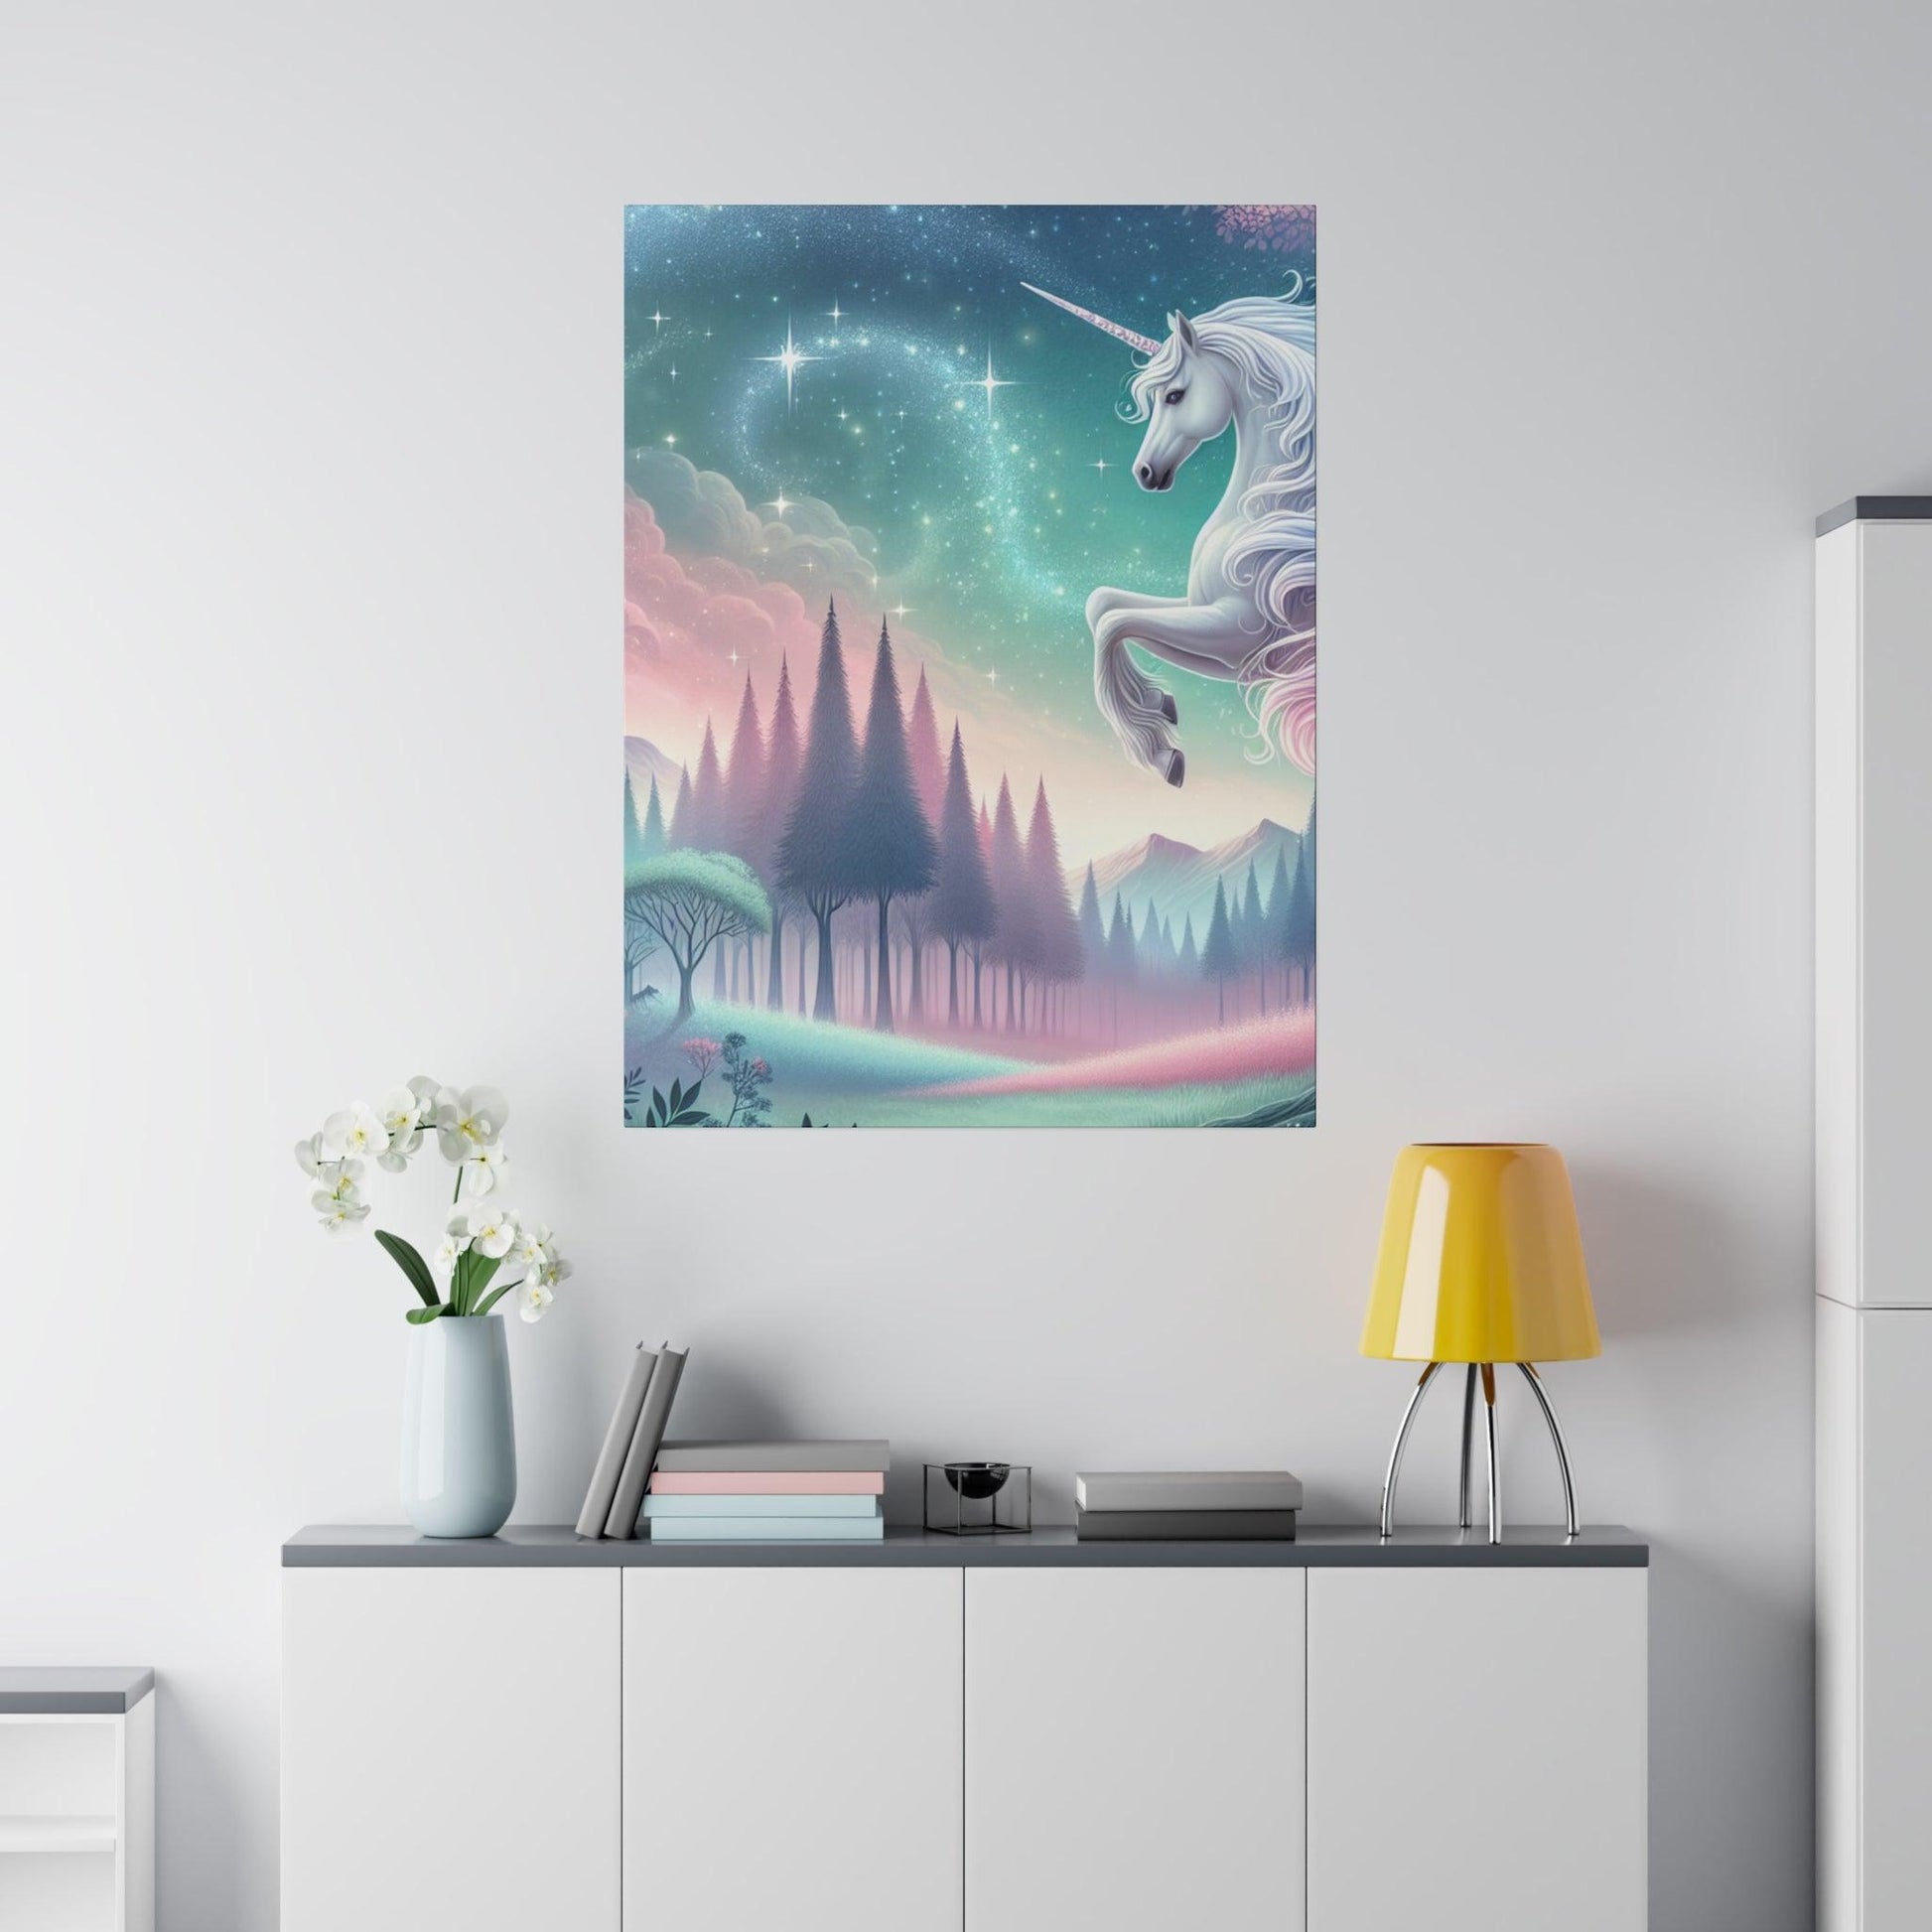 "Unicorn Whisper: Enchanted Canvas Wall Art" - Canvas - The Alice Gallery